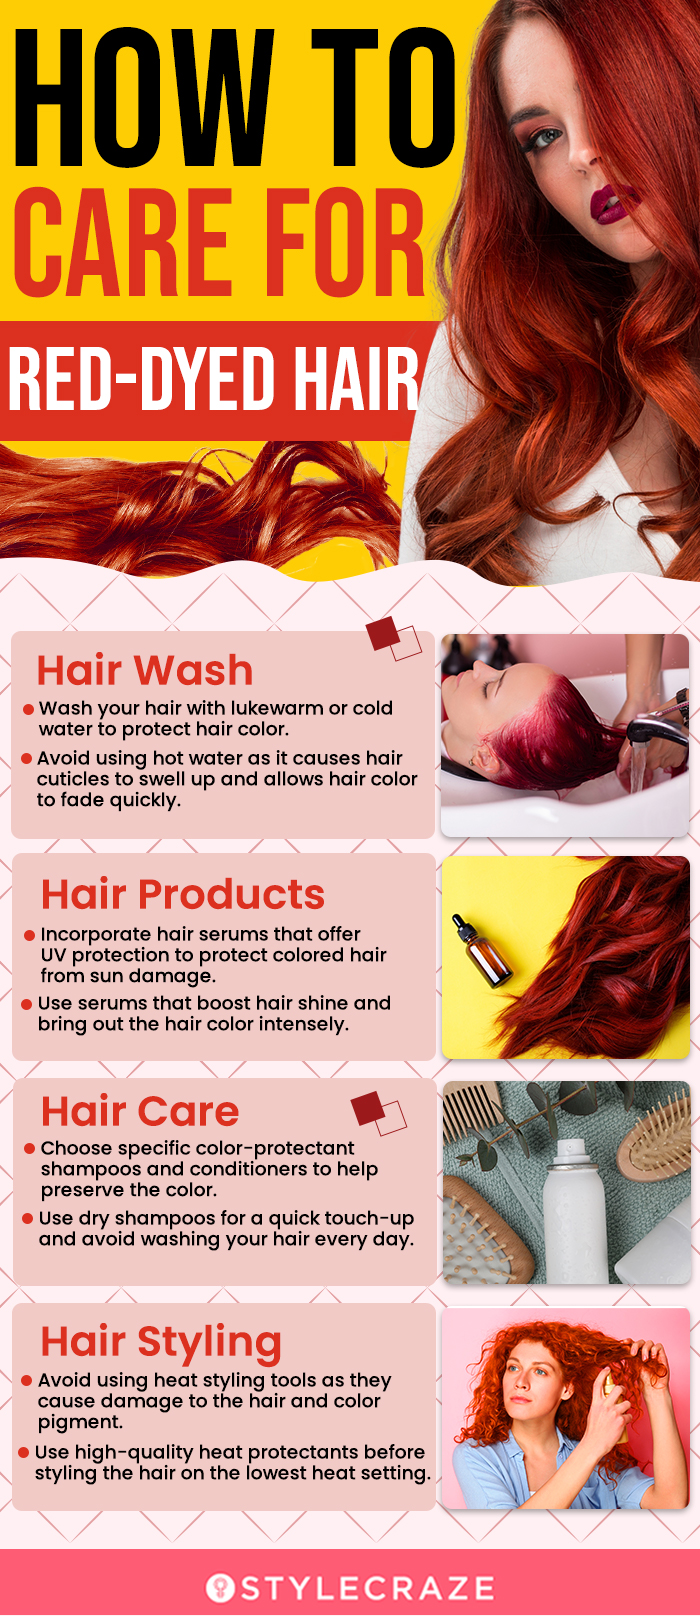 How To Care For Red-Dyed Hair  [infographic]